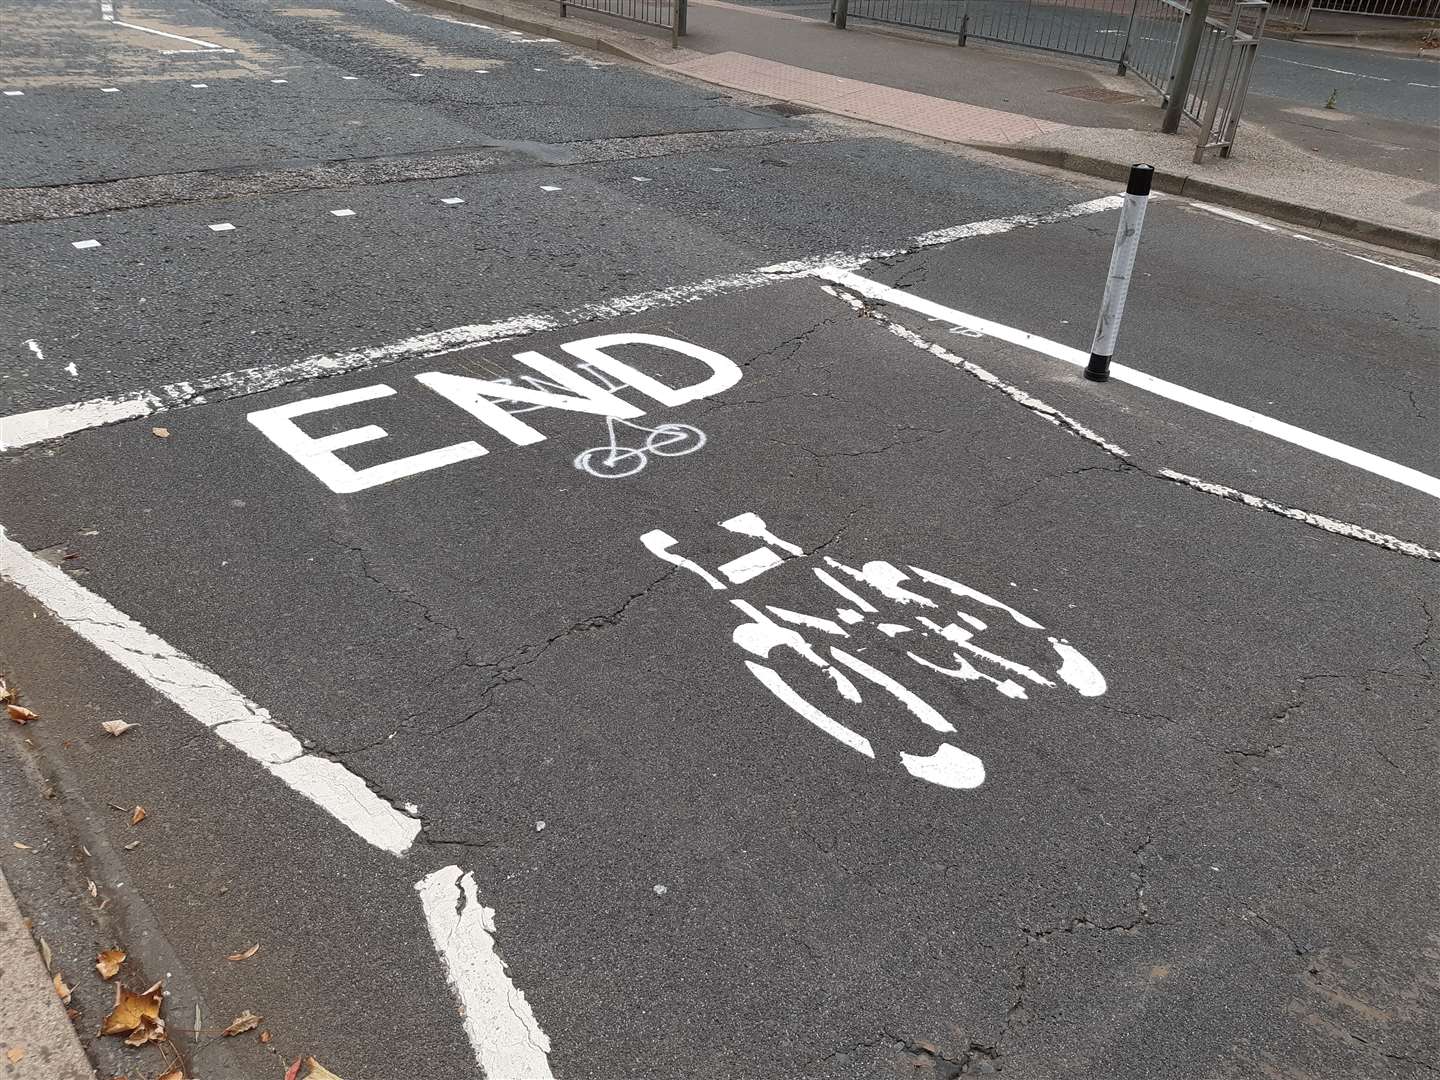 The cycle lane trial was due to run for up to 18 months, but has already ended